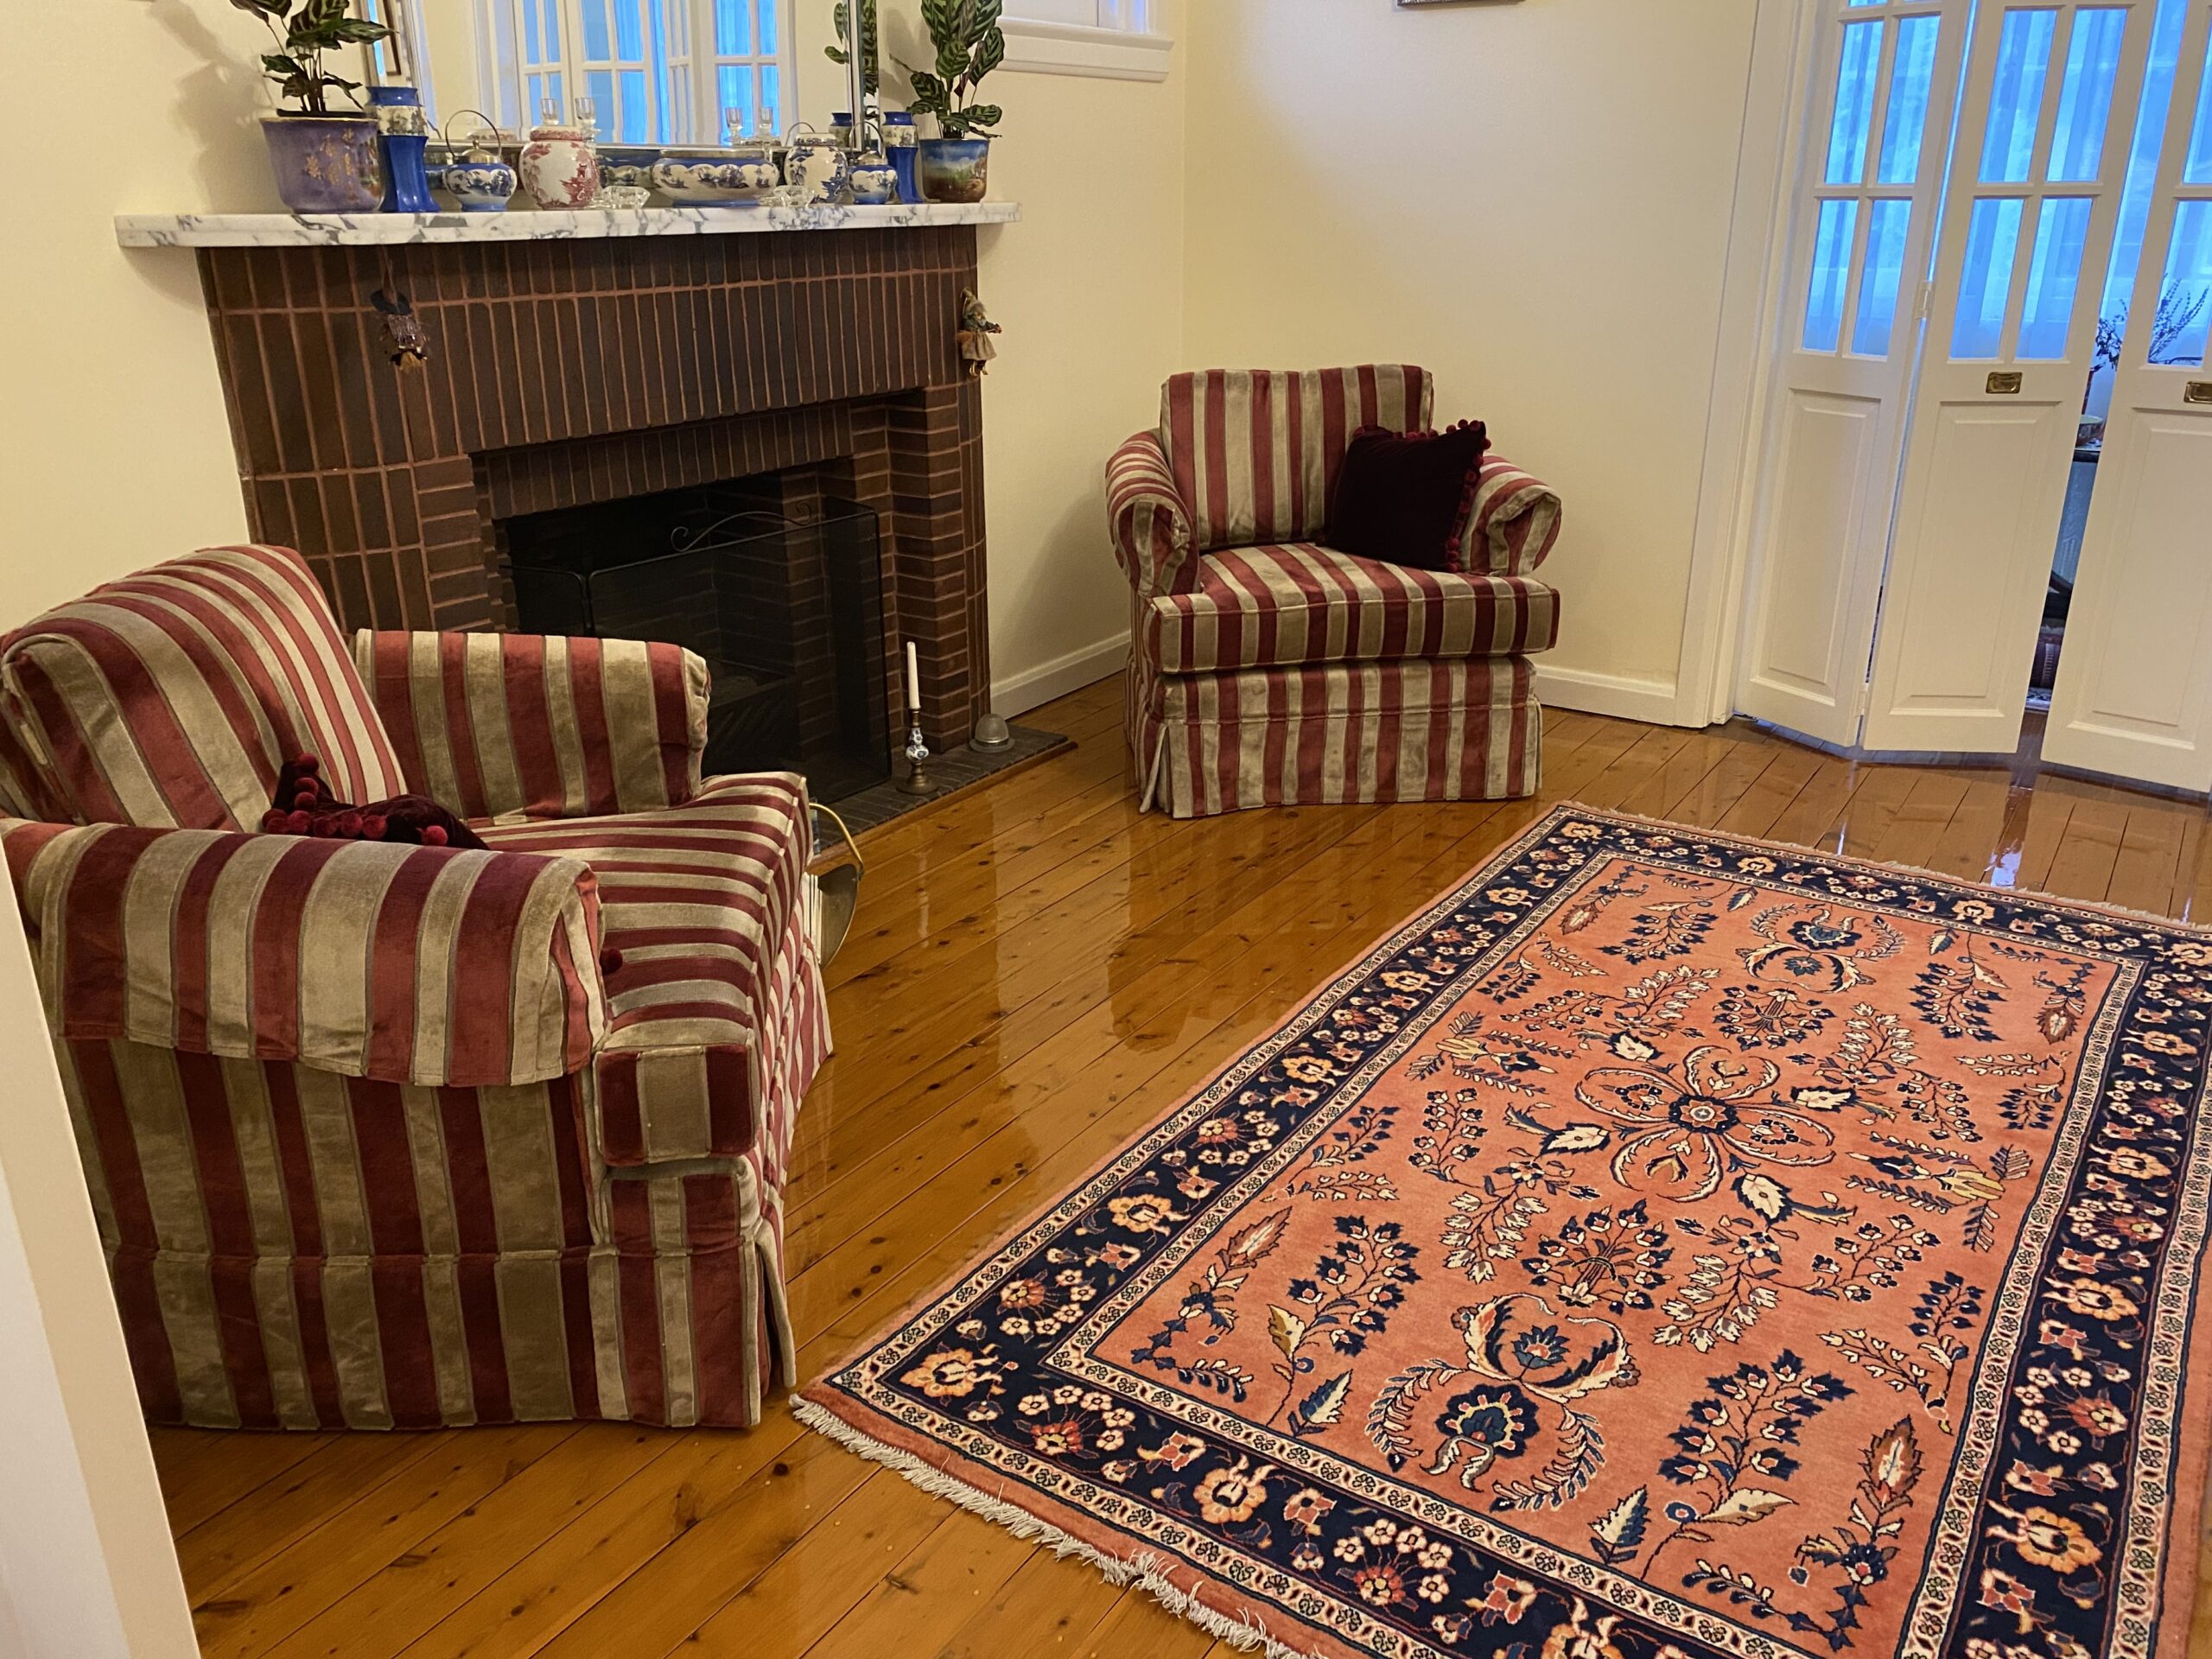 A Luxurious Persian Rug Adorning a Chic Living Space